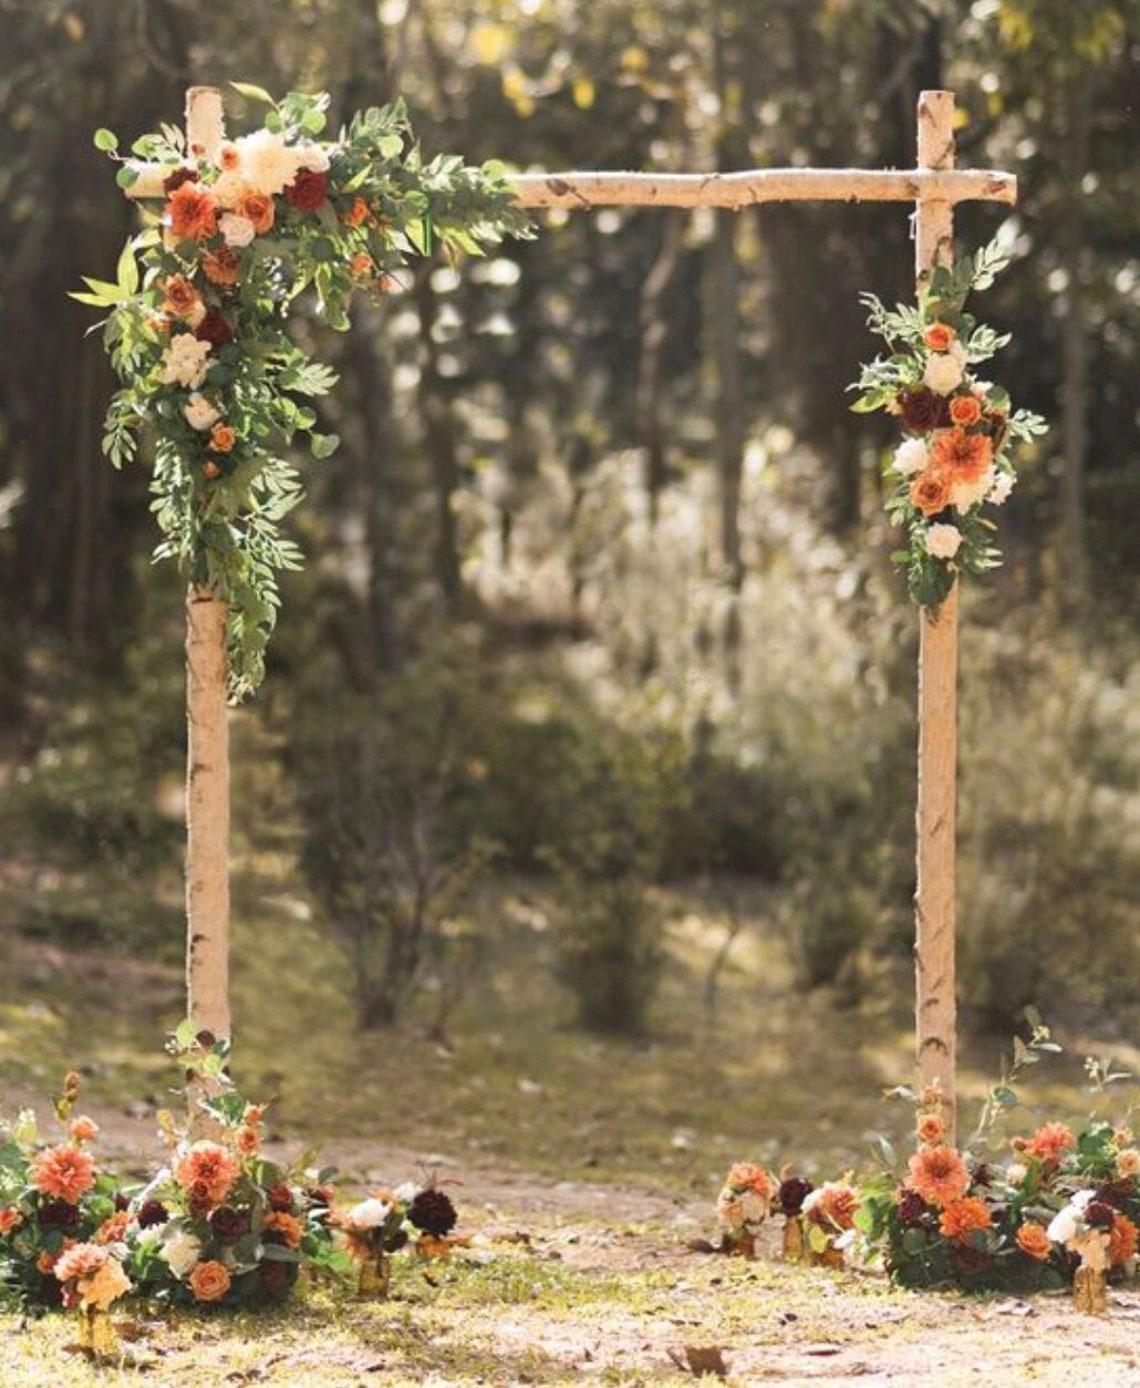 7.5 FT. Rustic Square Birch Arch Distressed Wedding image 1